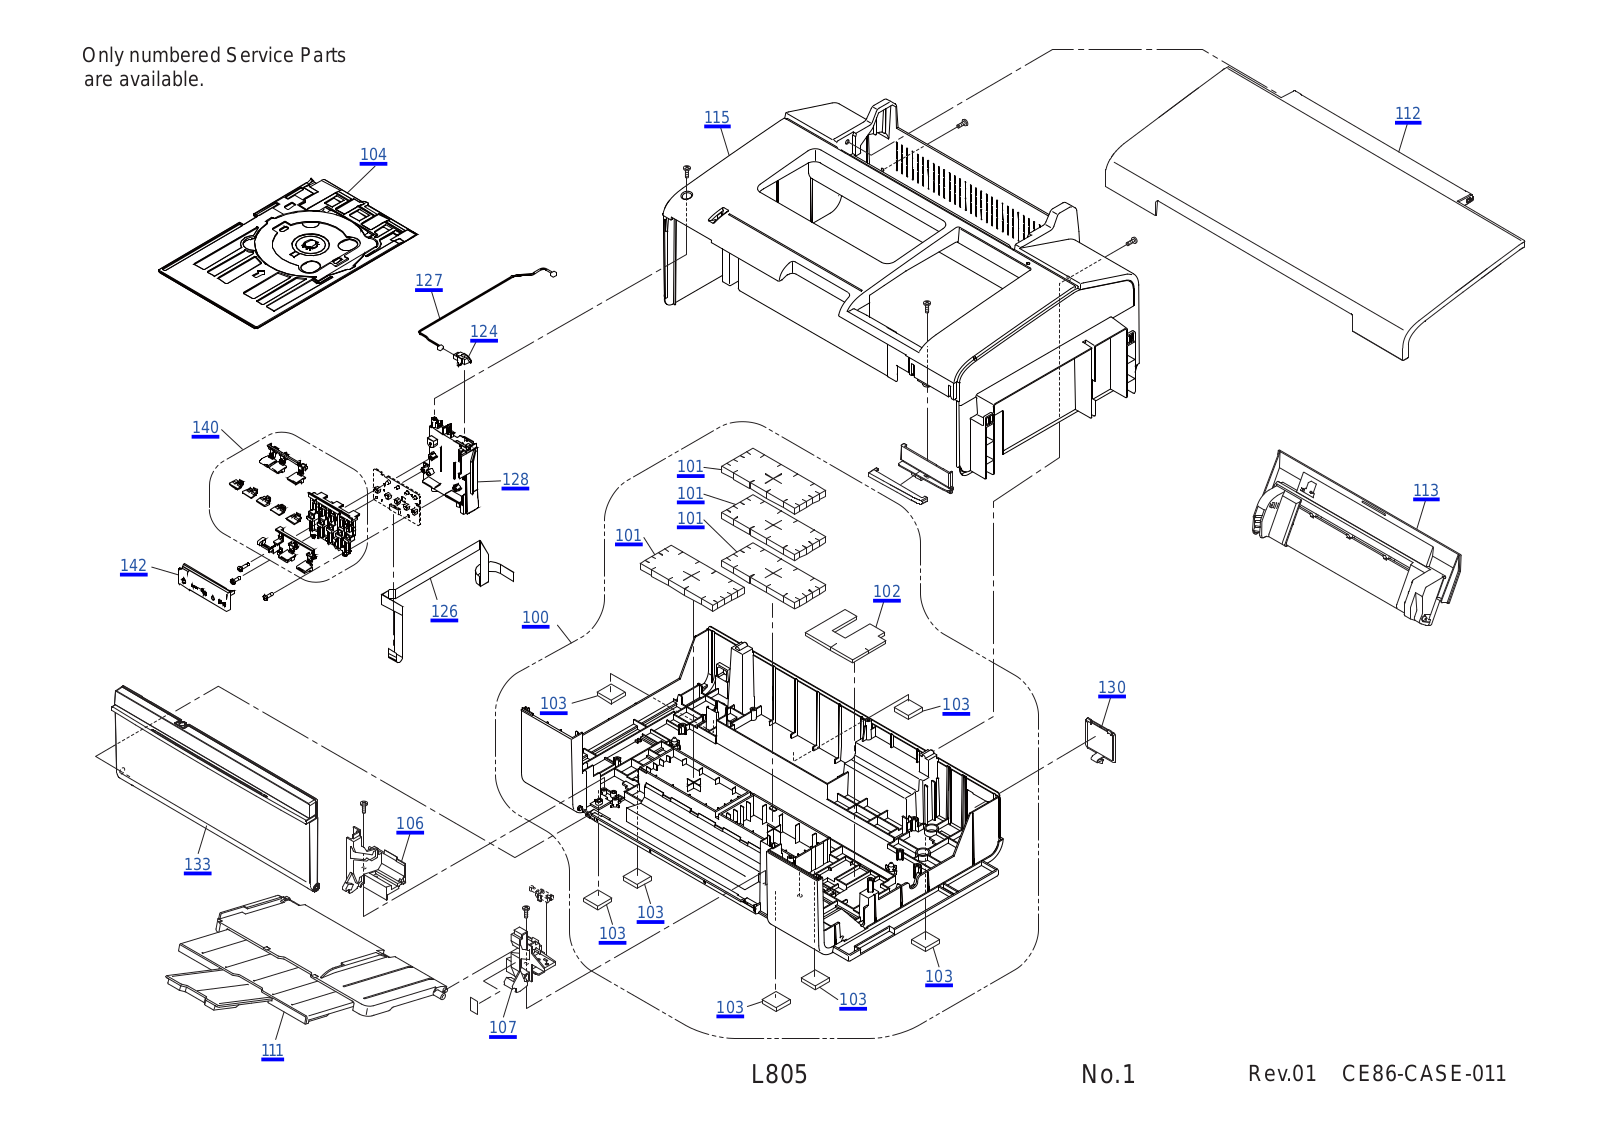 Epson L805, CE86 Exploded Diagrams CASE 011